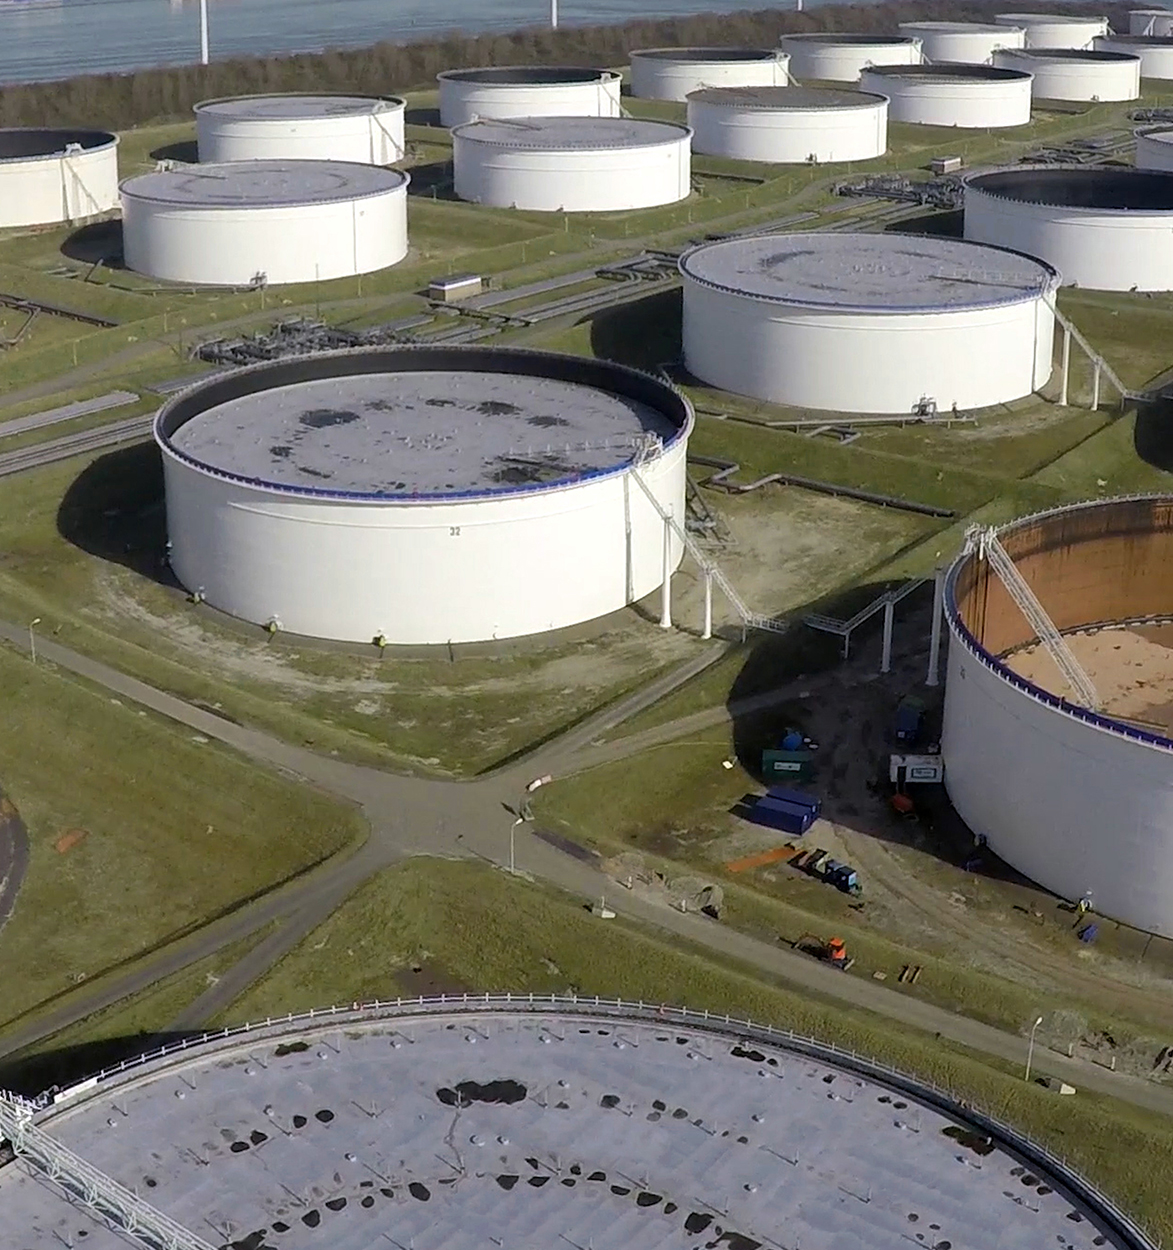 Main image of floating roof seals and aboveground storage tanks.